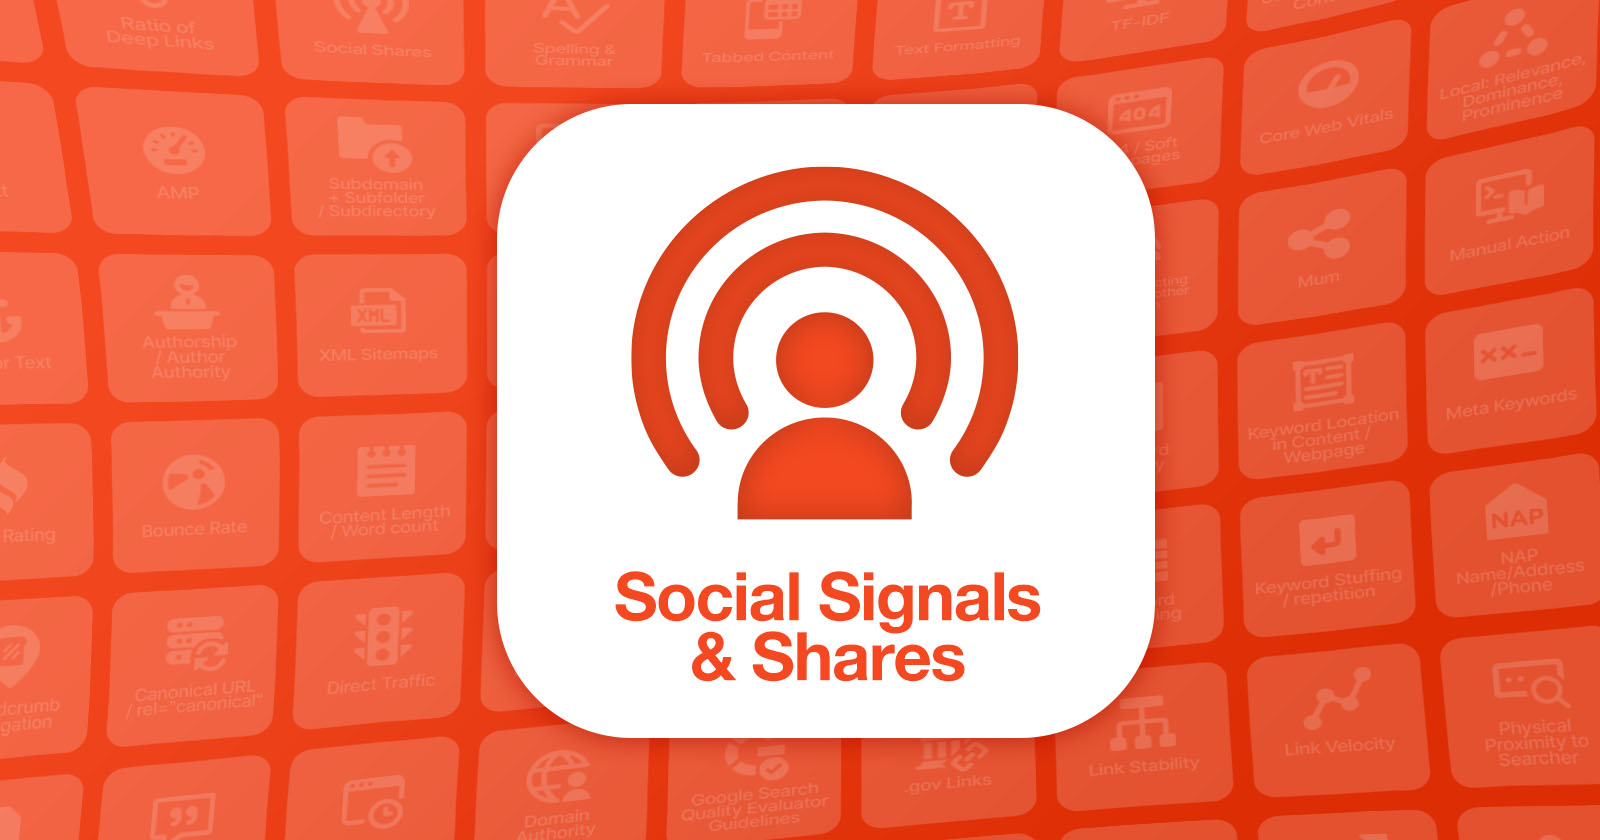 Are Social Signals & Shares A Google Ranking Factor?